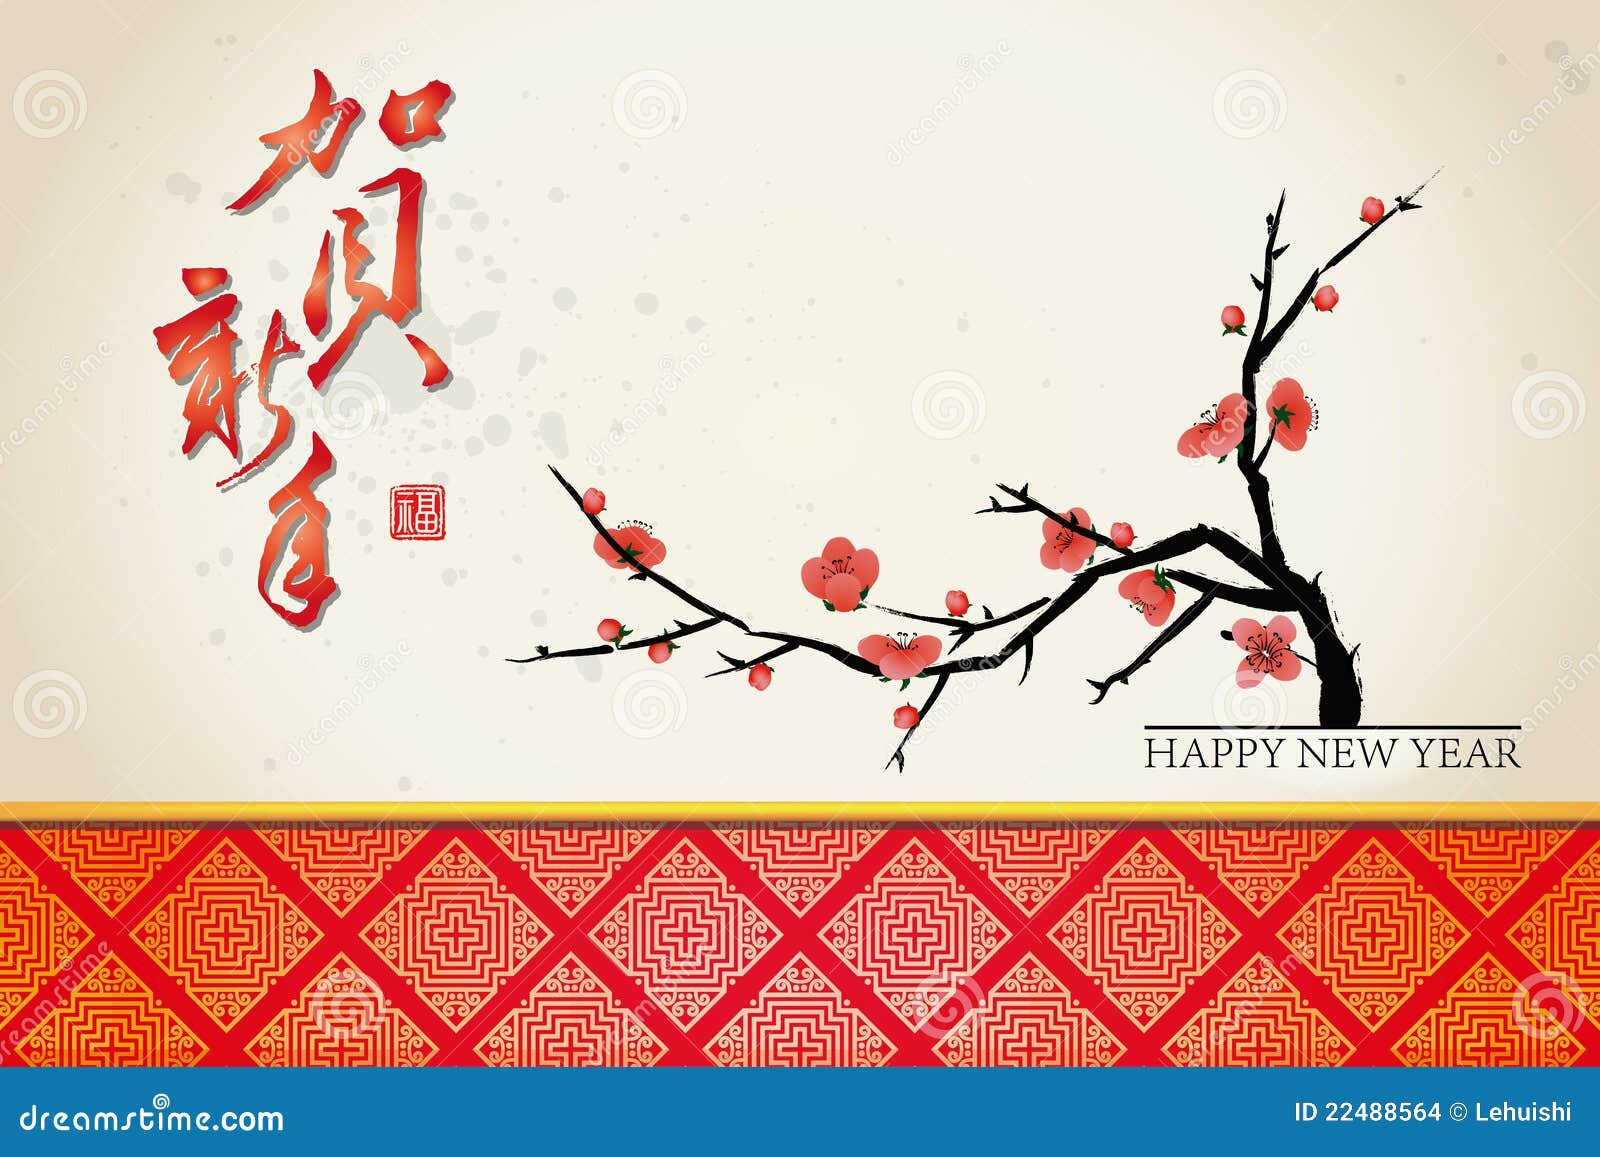 Chinese New Year Greeting Card Background Stock Images - Image.